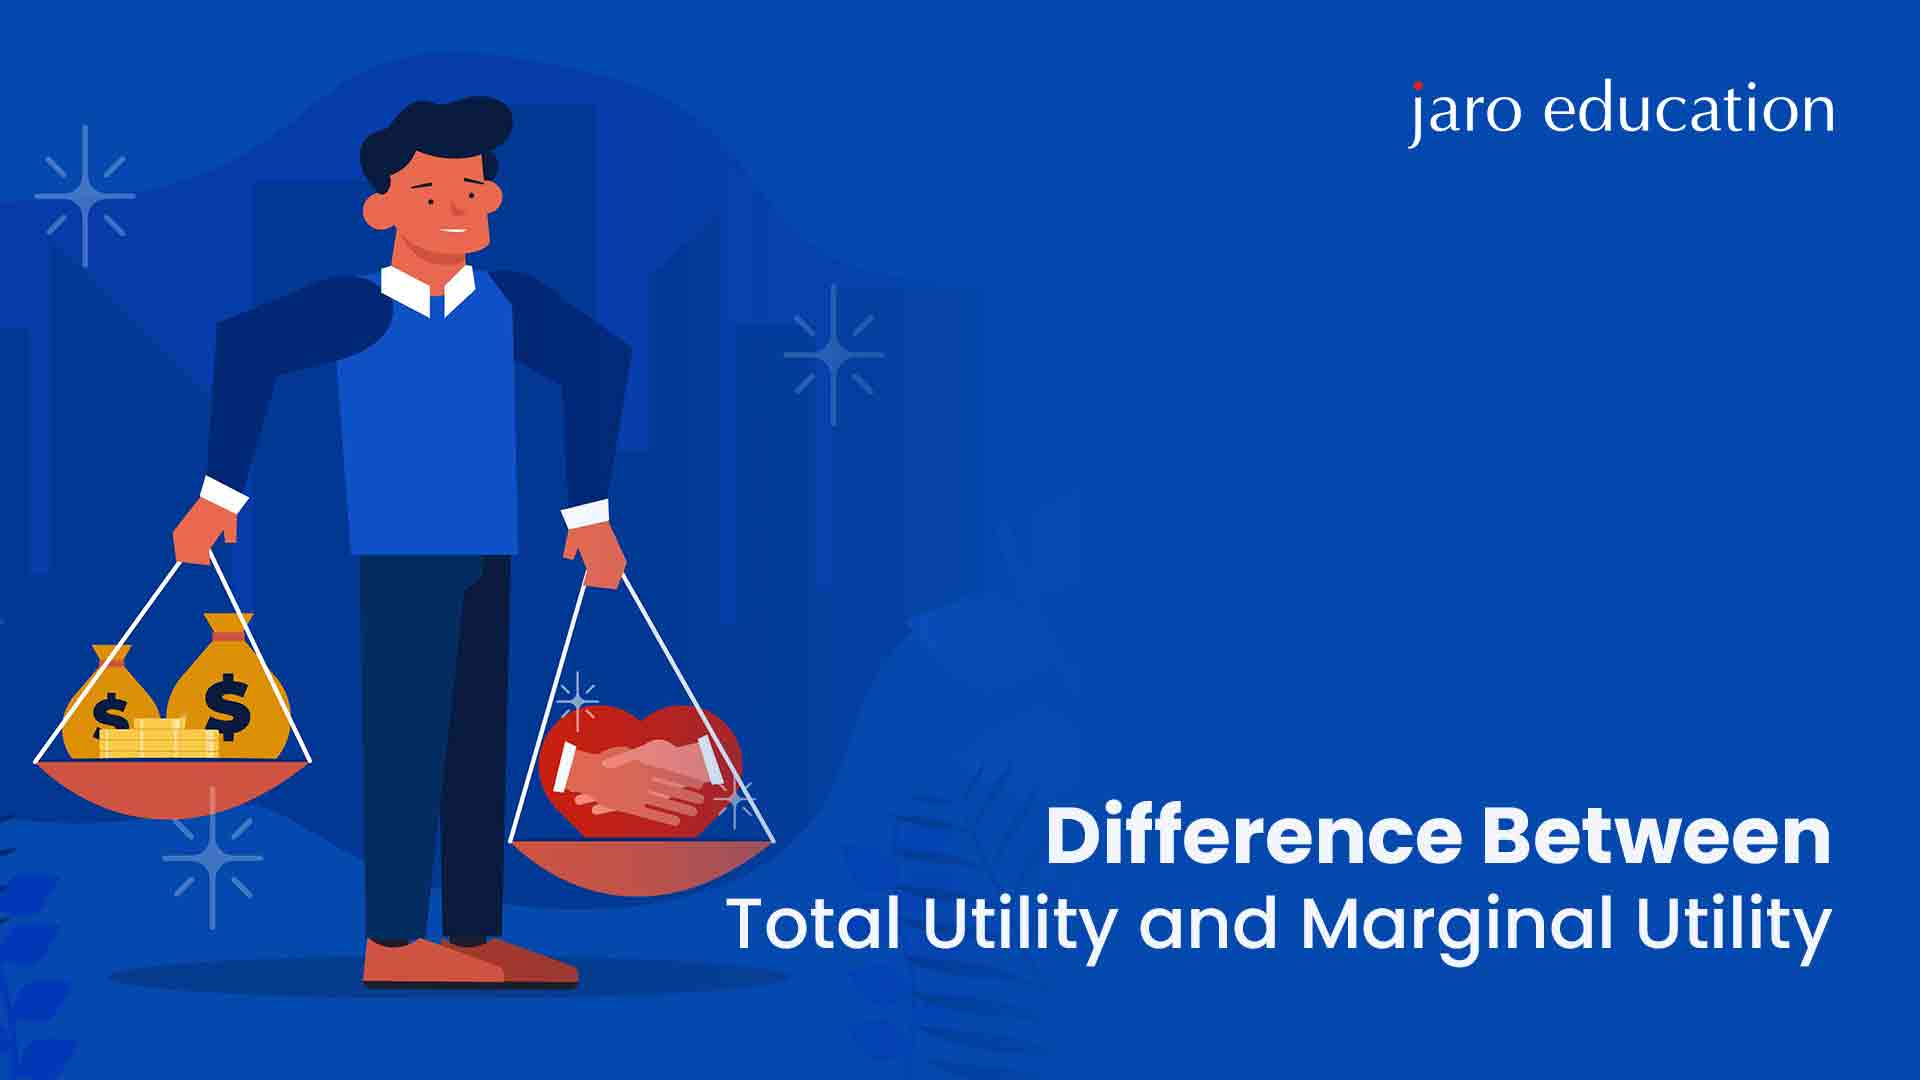 Difference Between Total Utility and Marginal Utility